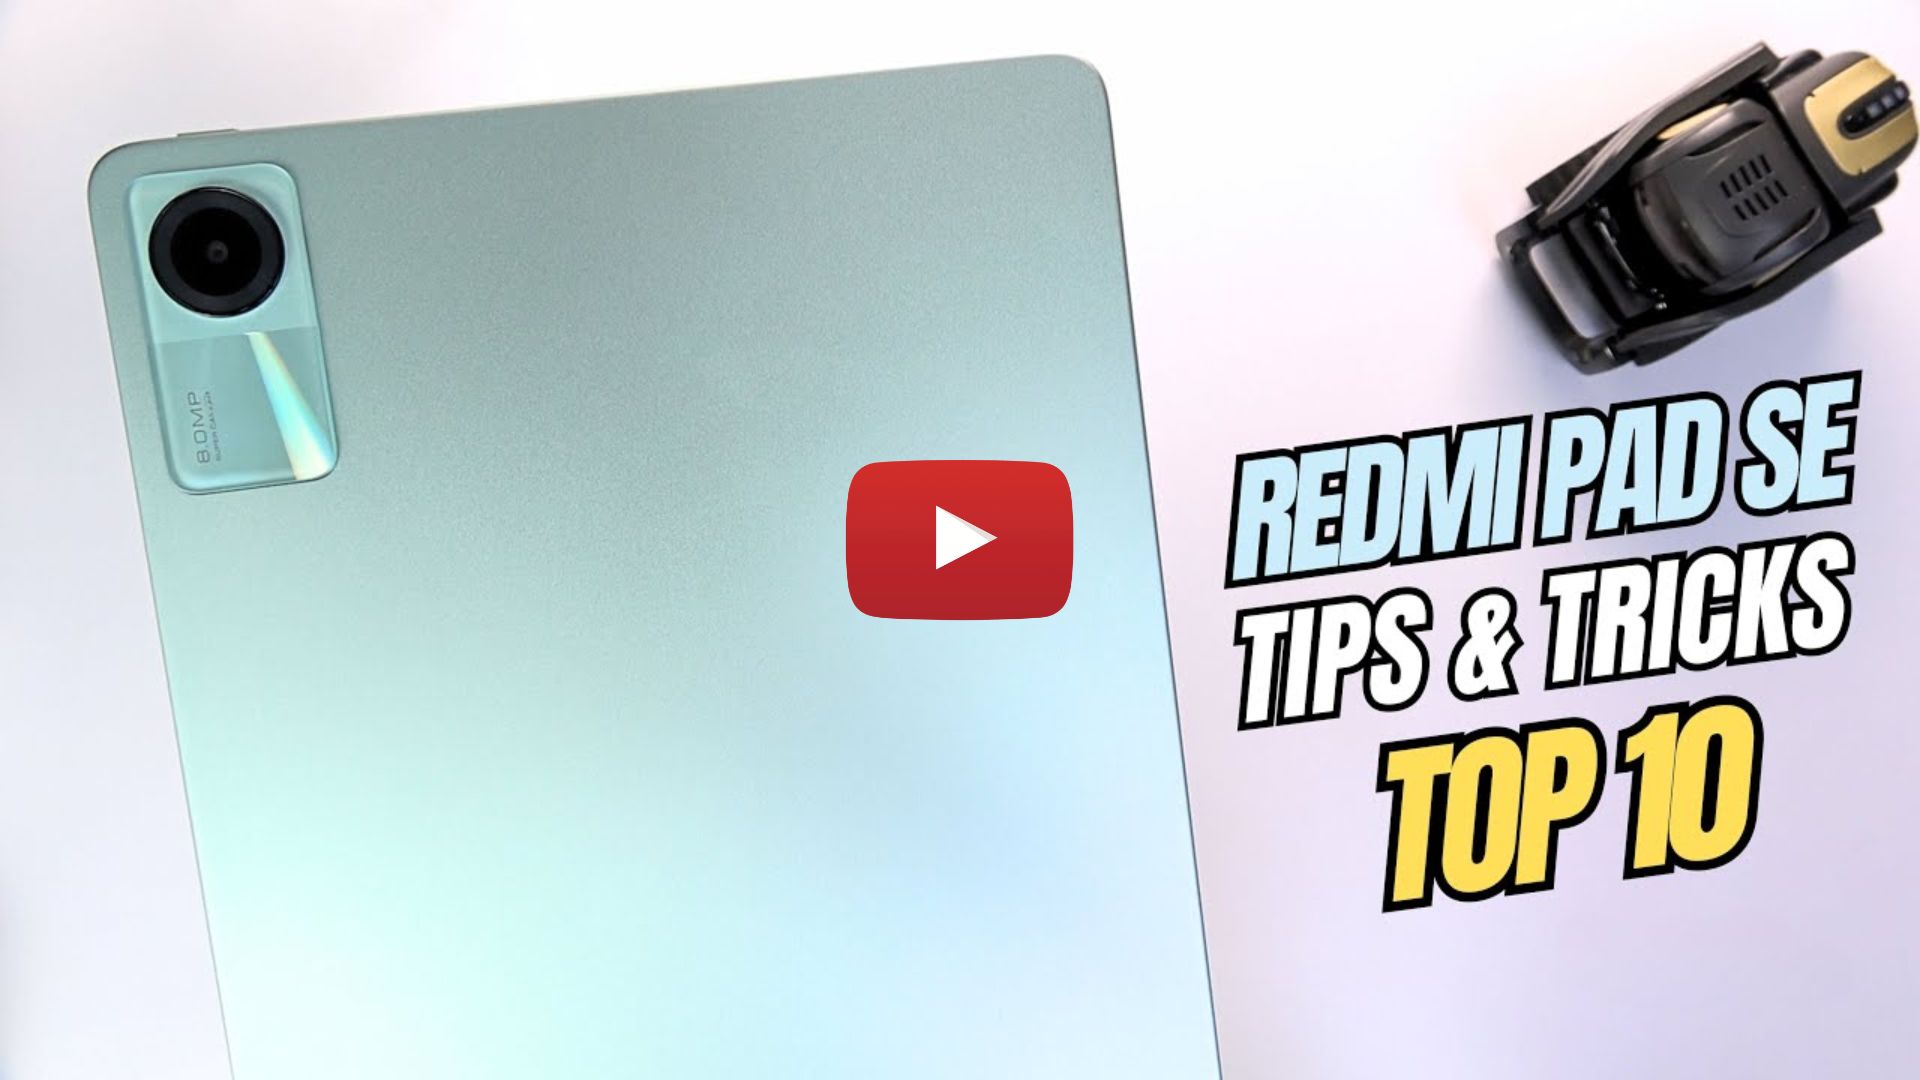 Top 10 Tips and Tricks Redmi Pad SE - GSM FULL INFO %